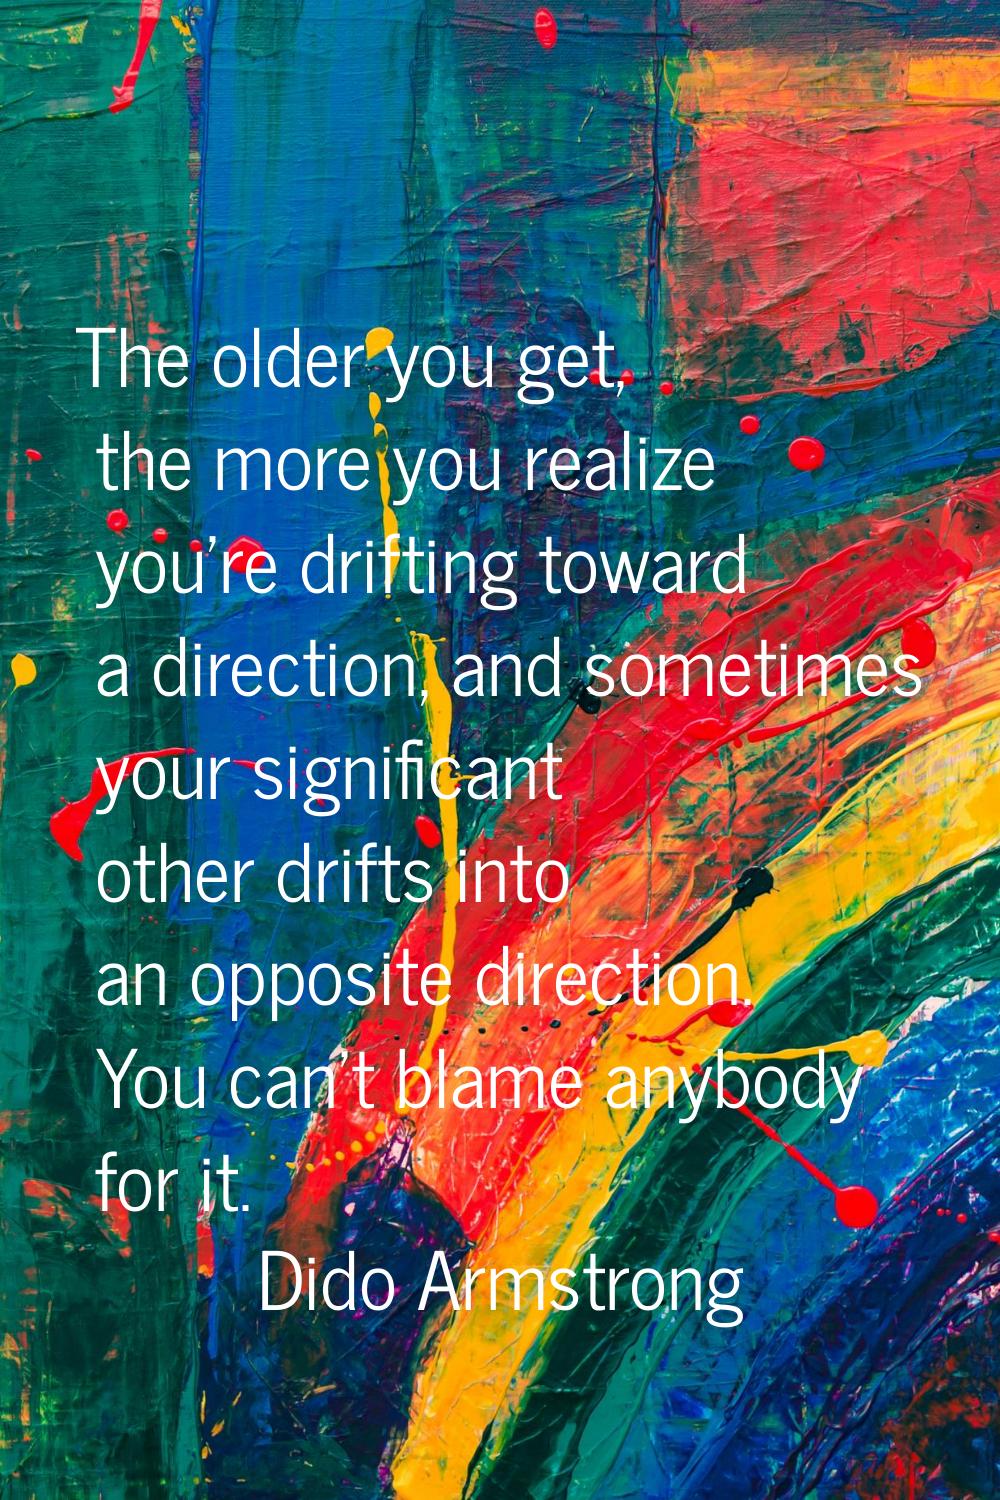 The older you get, the more you realize you're drifting toward a direction, and sometimes your sign